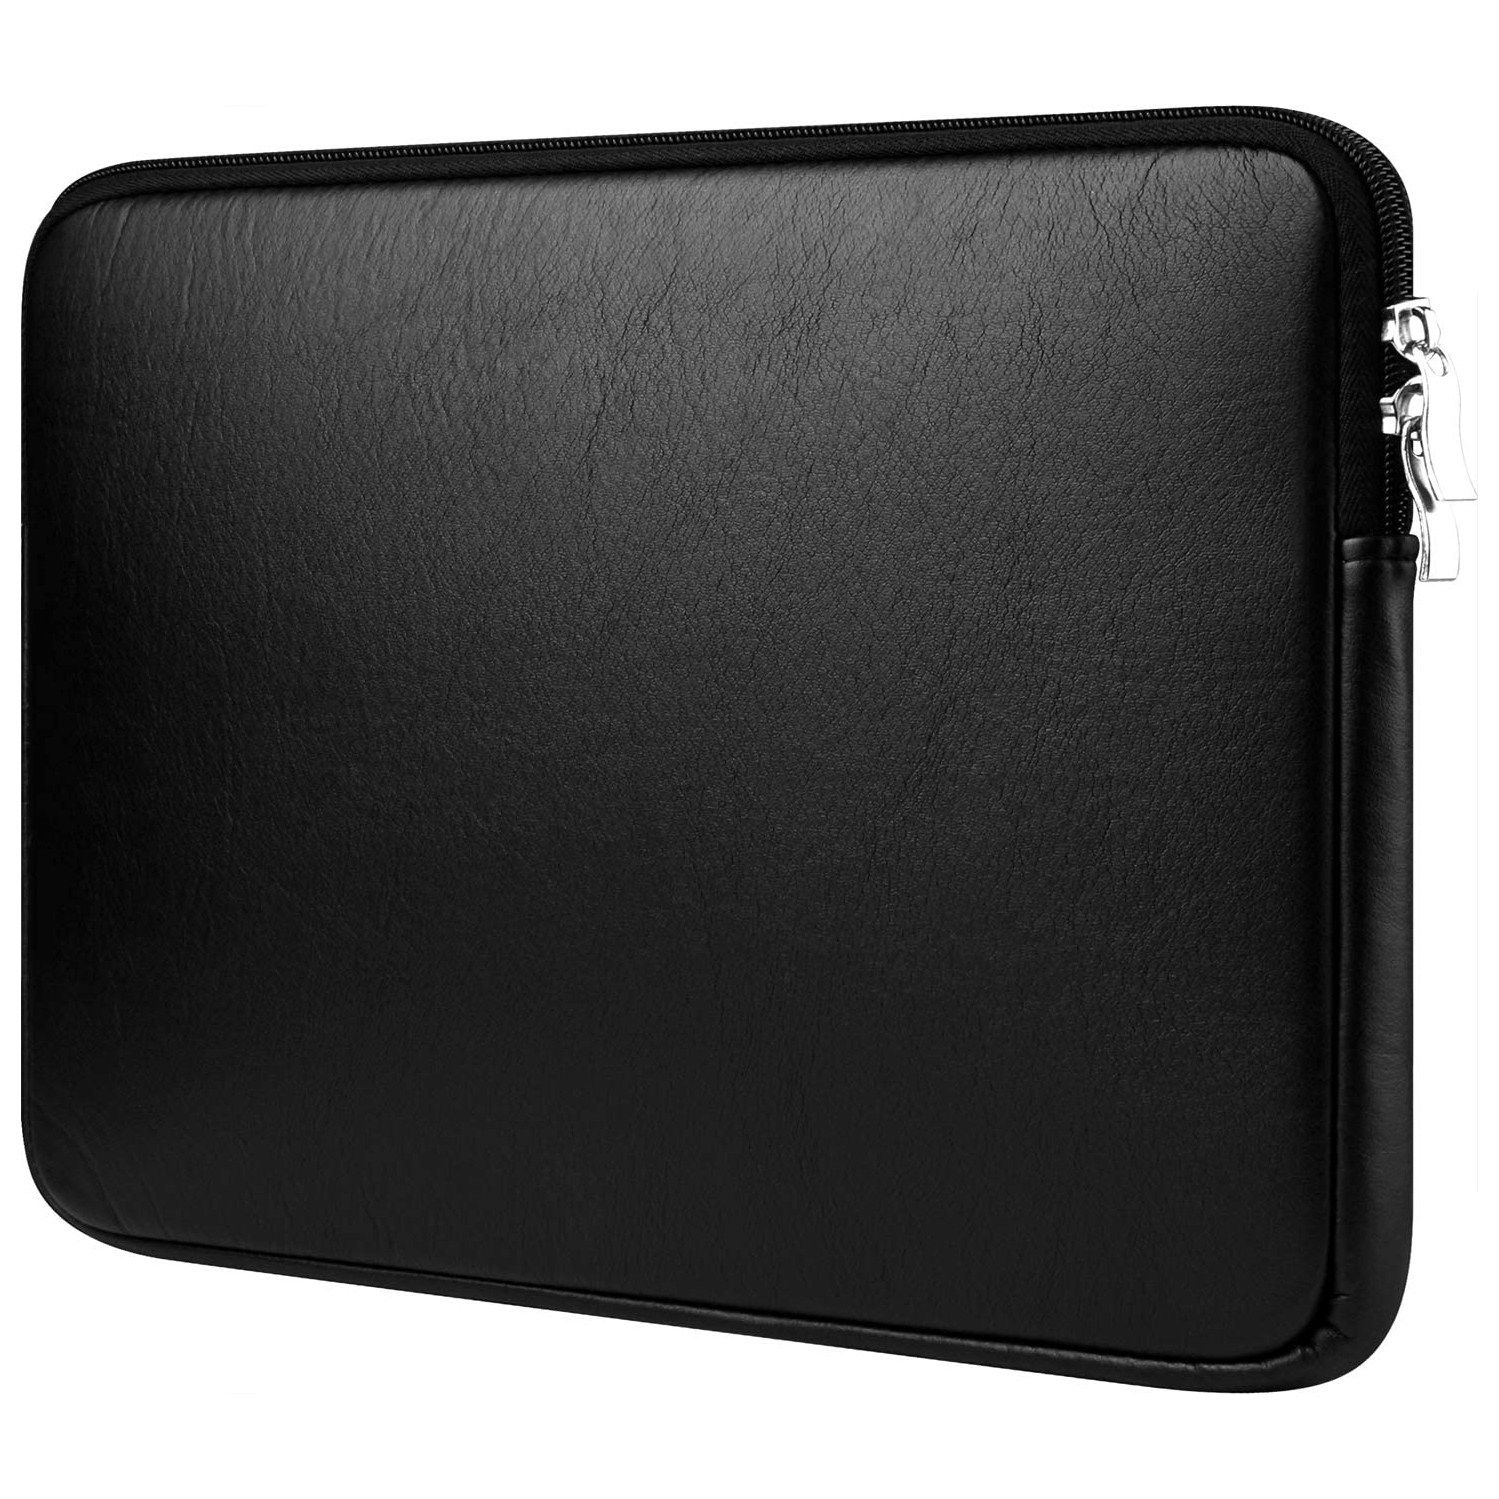 14" (Narrow Bezel) Laptop Sleeve Compatible for 13 Inch MacBook Air Pro Hp 14 Inch Laptop Cover Chromebook 14 in